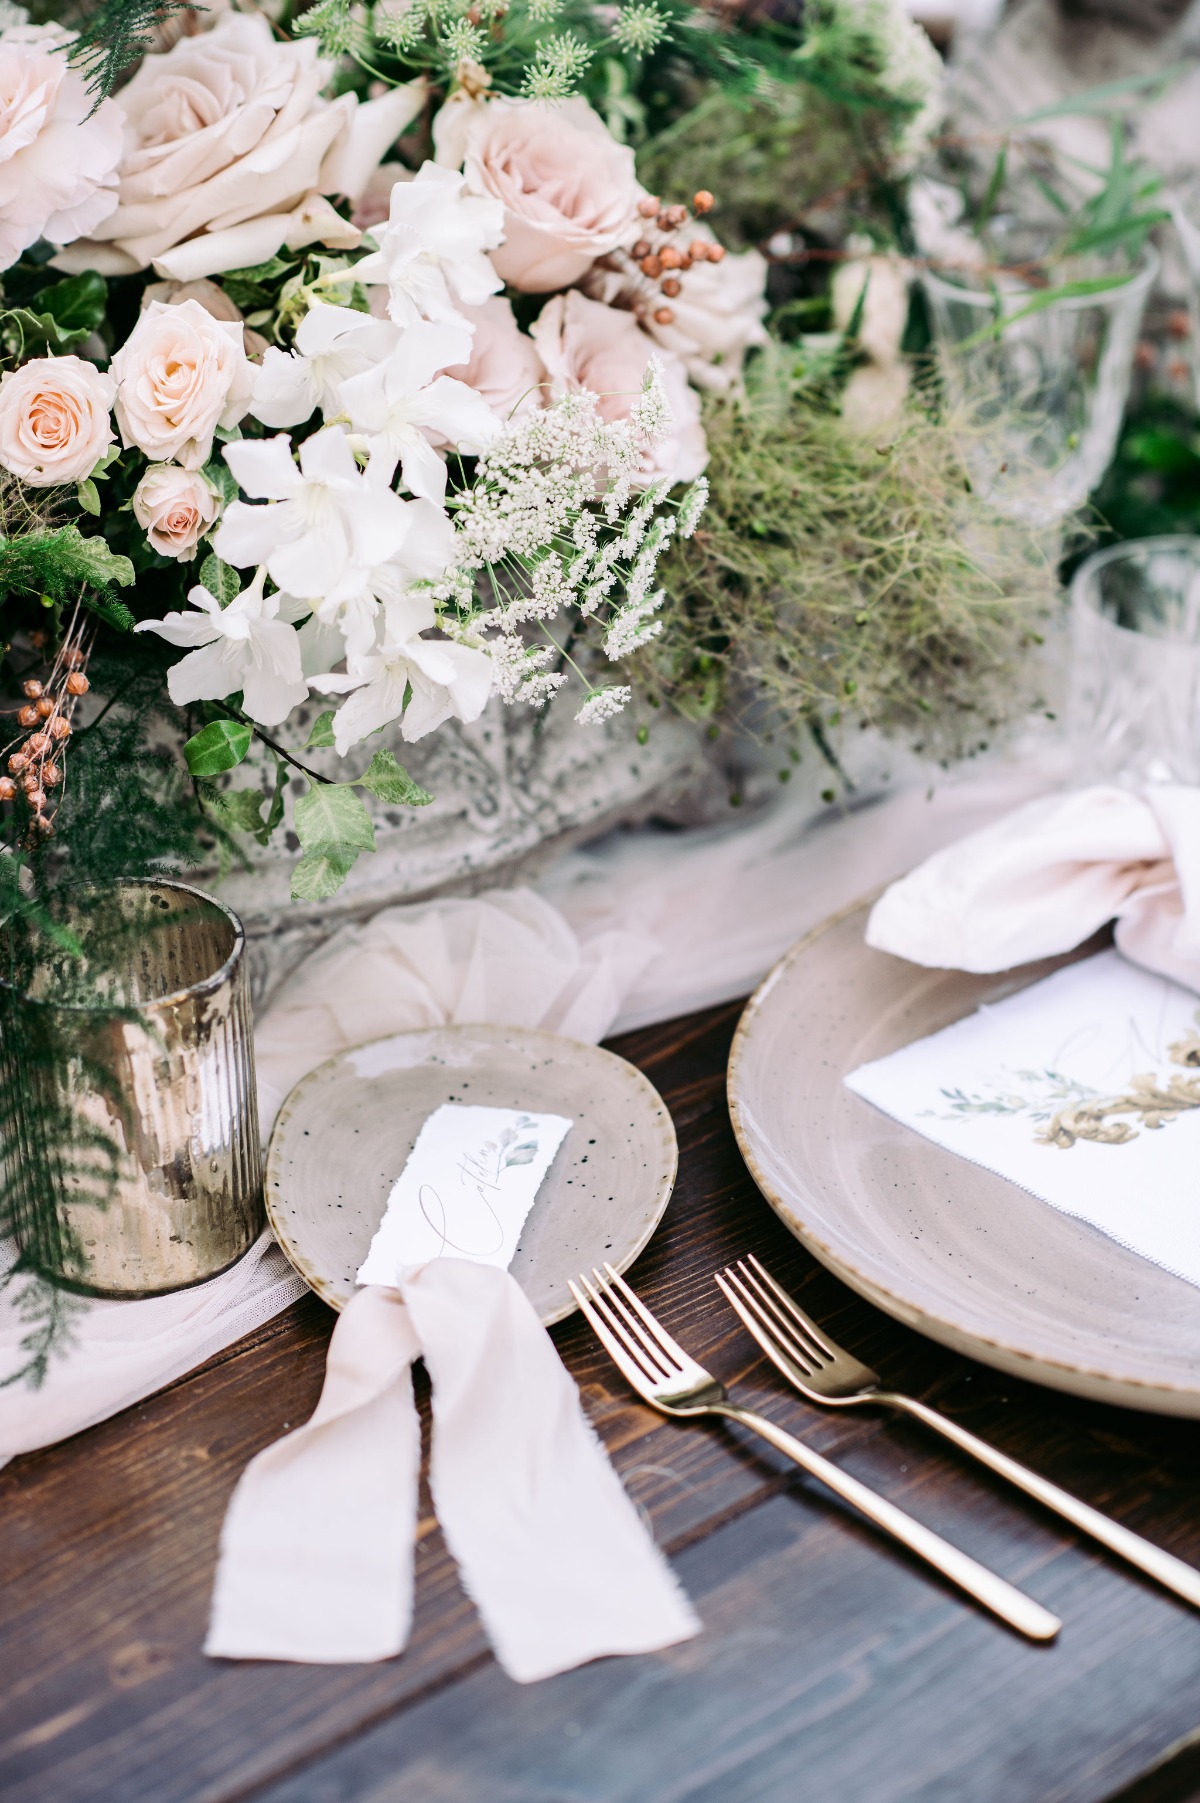 This Styled Shoot in Sorrento, Italy Highlights the Beauty of a Bride in Vein With an Iconic Botticelli Painting